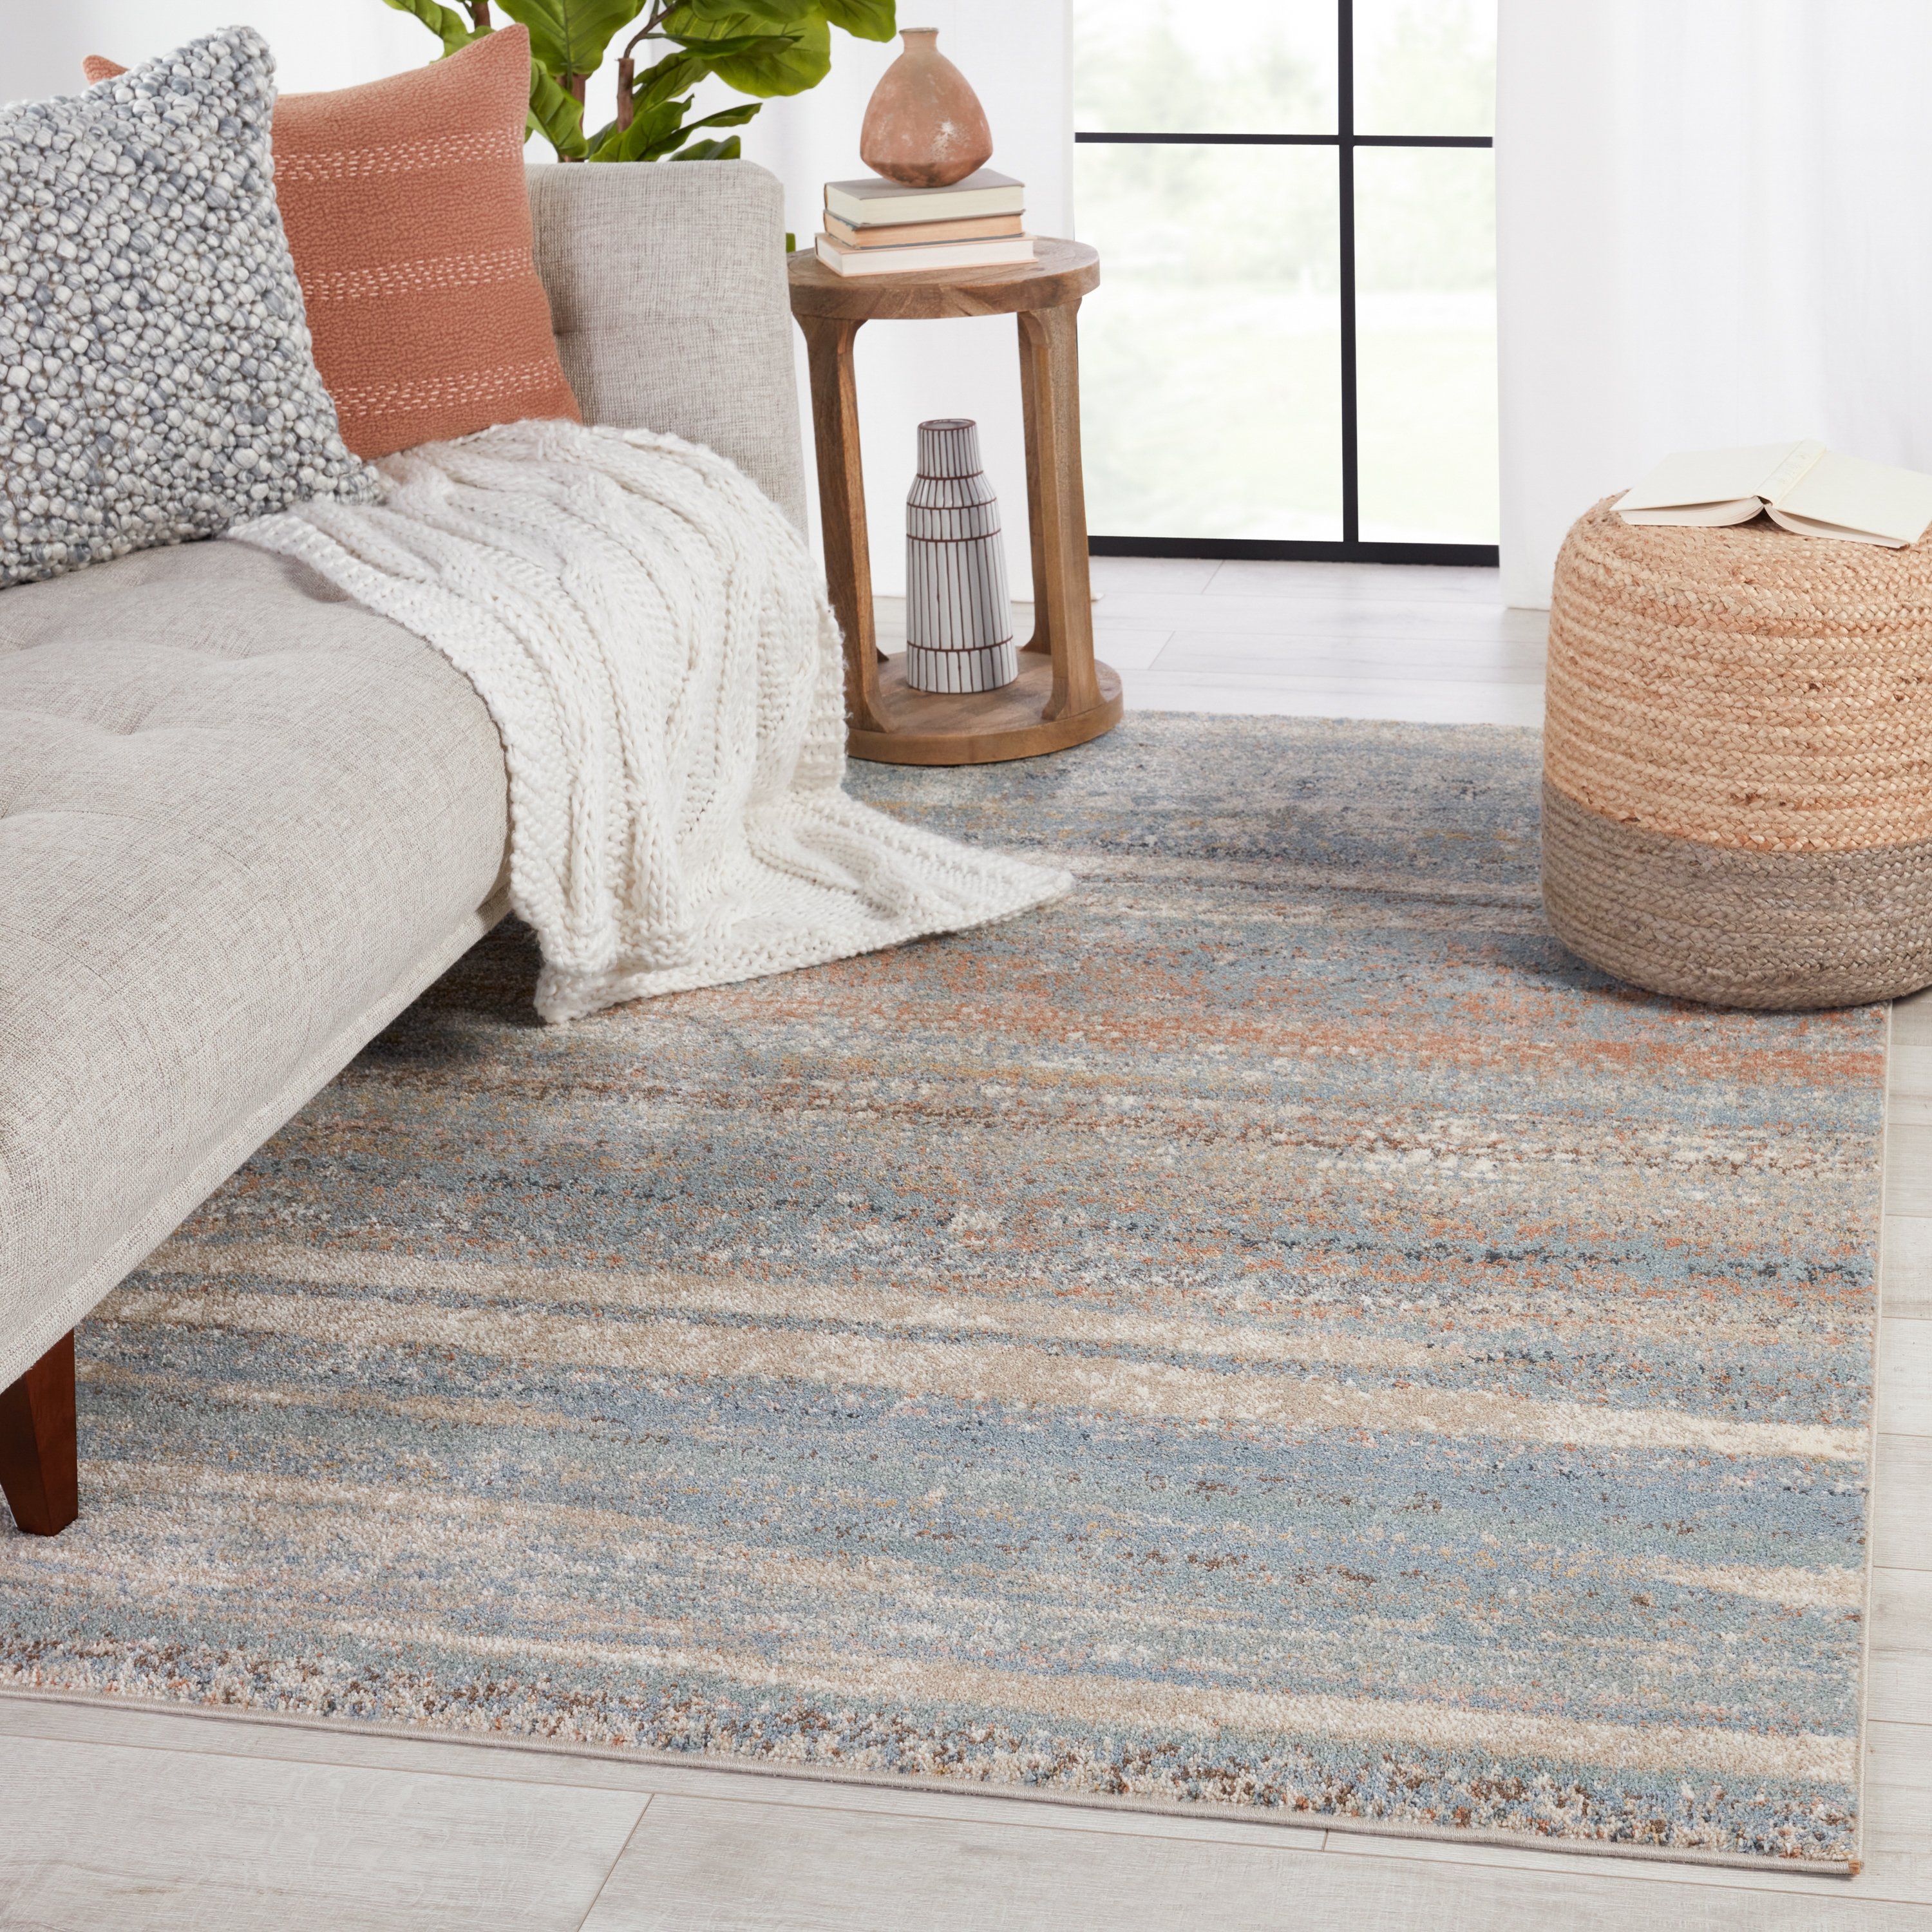 Vibe by Devlin Abstract Blue/ Tan Area Rug (6'7"X9'6") - Image 5